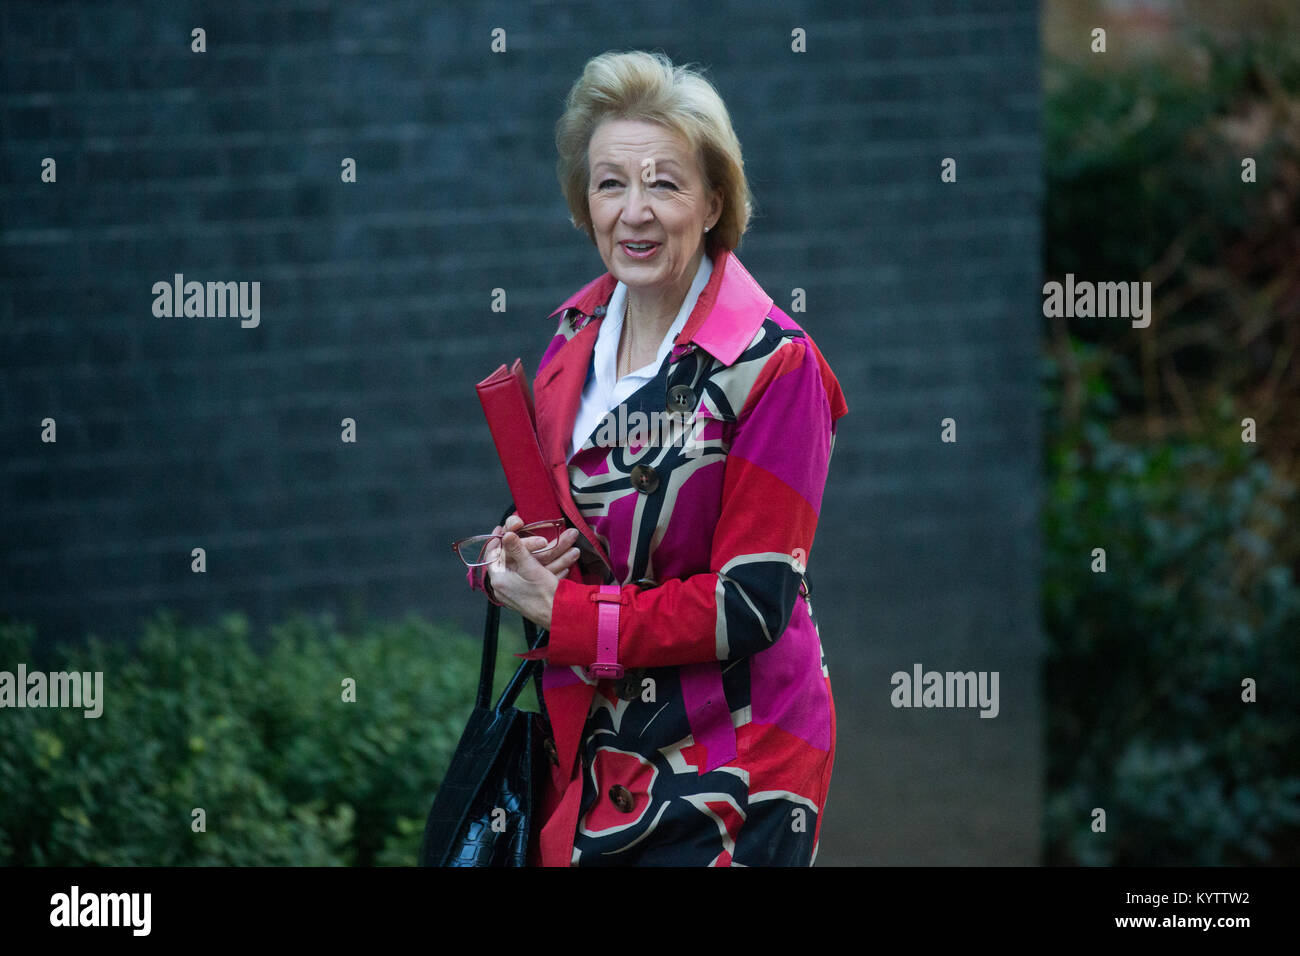 Andrea Leadsom, Leader of the House of Commons and Lord President of the Council, arrives for a Cabinet meeting at Downing Street in a colourful outfit Stock Photo